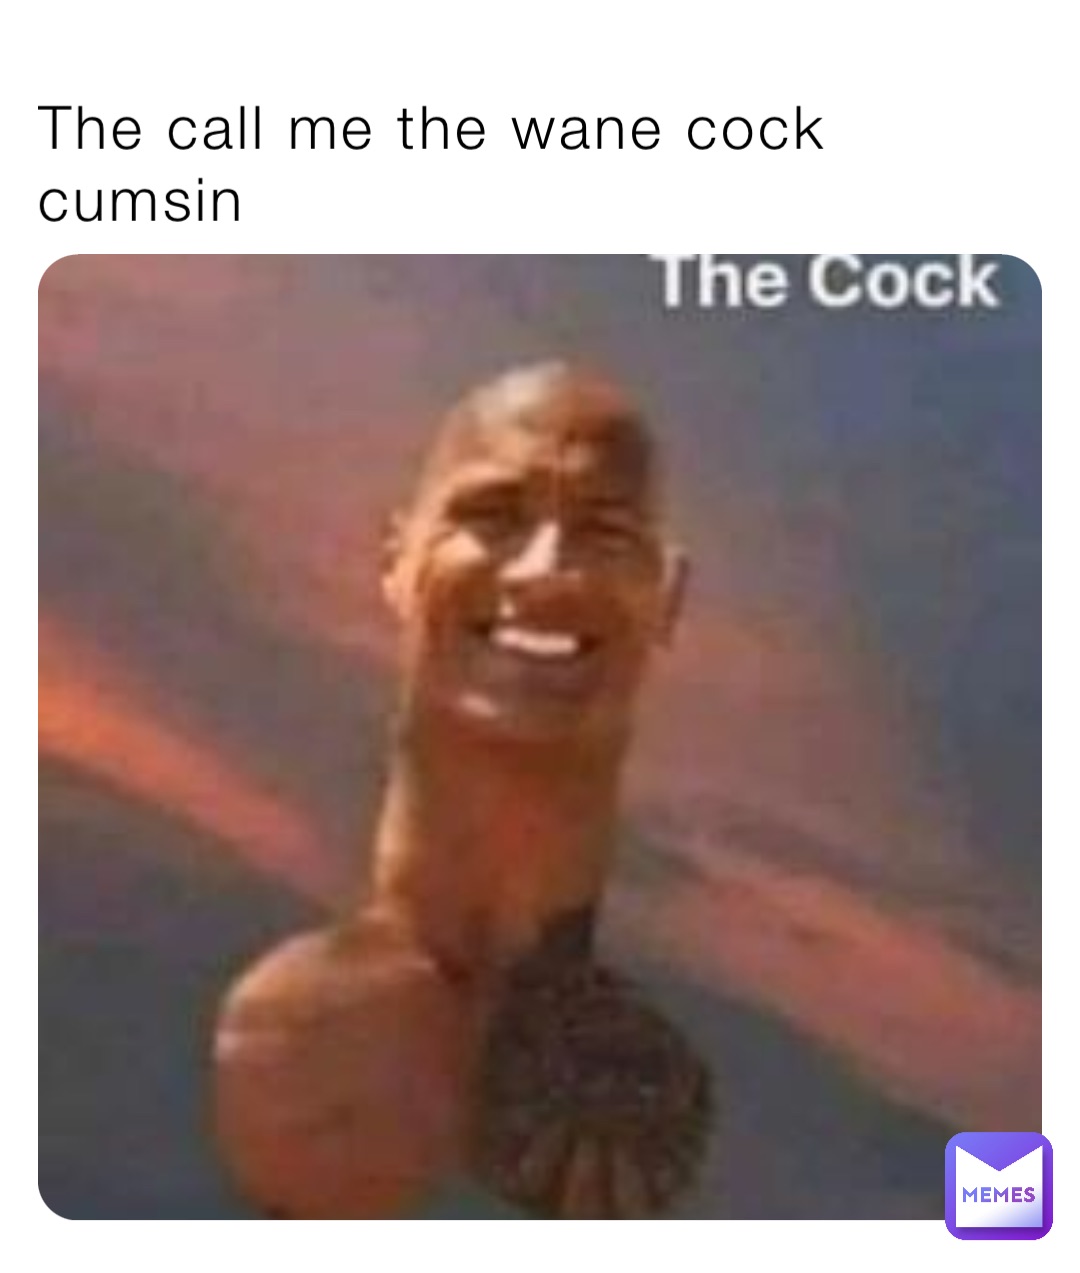 The call me the wane cock cumsin